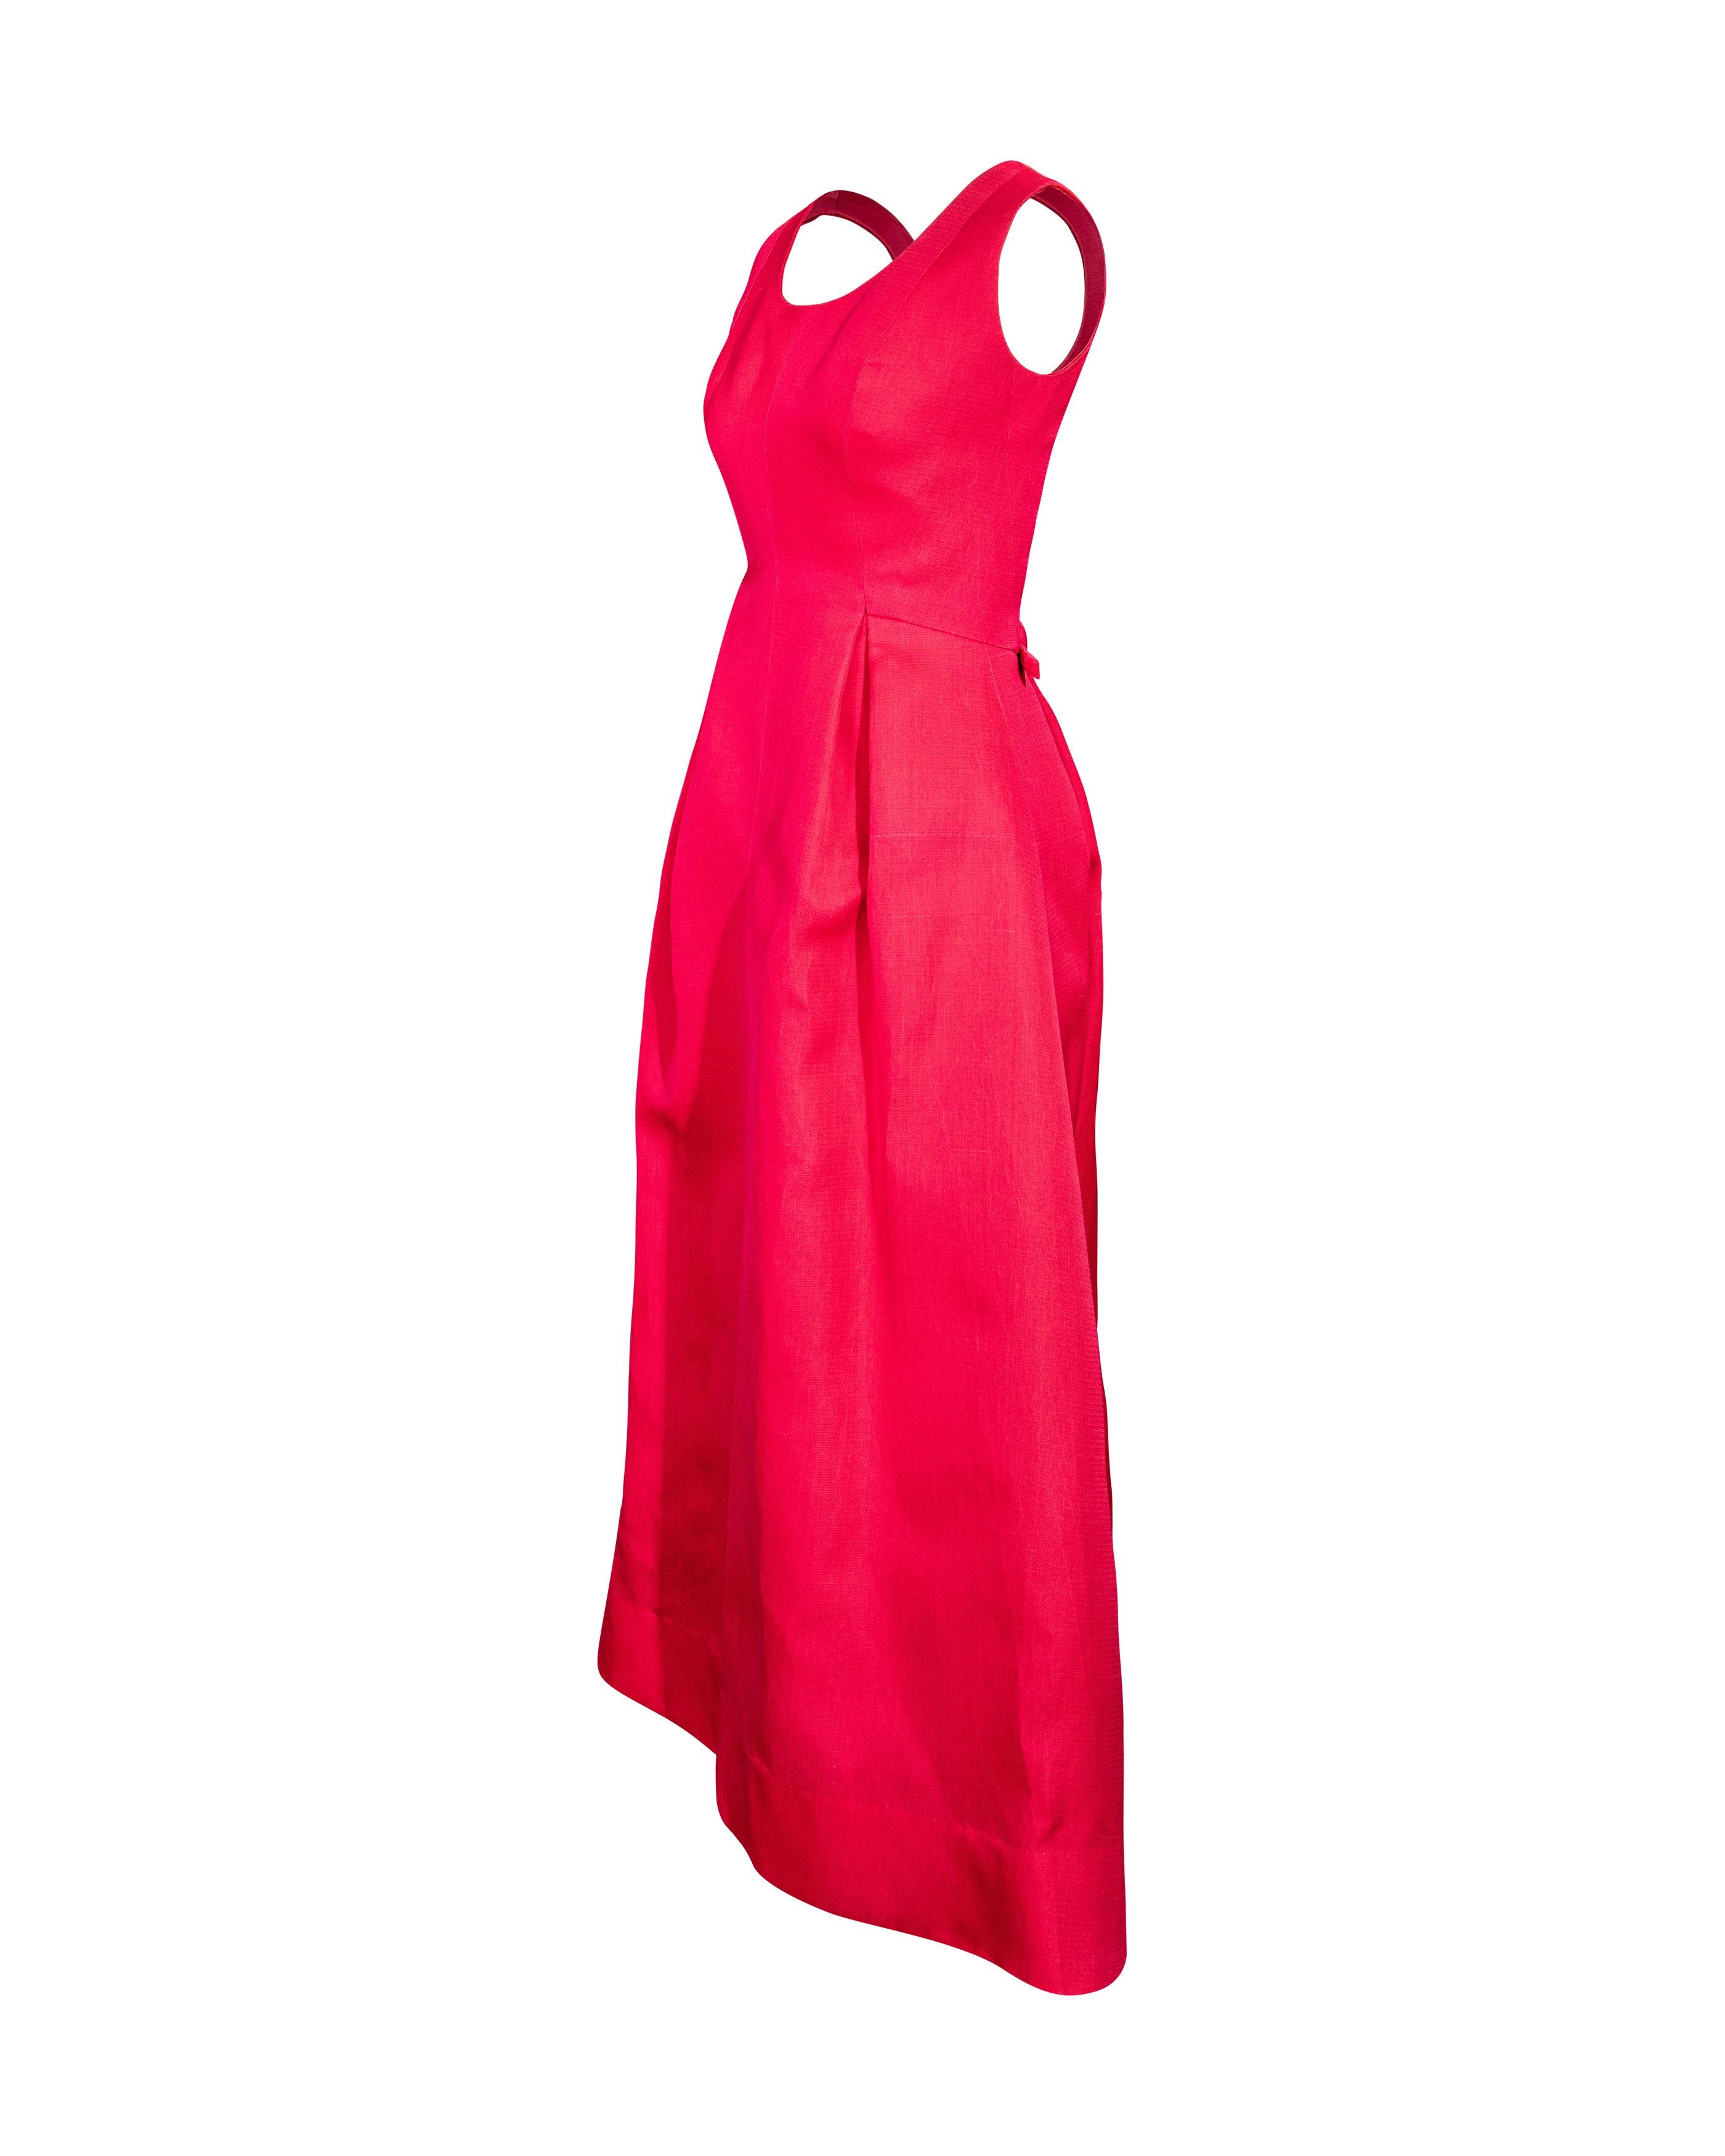 S/S 1964 Balenciaga Deep Rose Pink Silk Sleeveless Gown In Good Condition In North Hollywood, CA